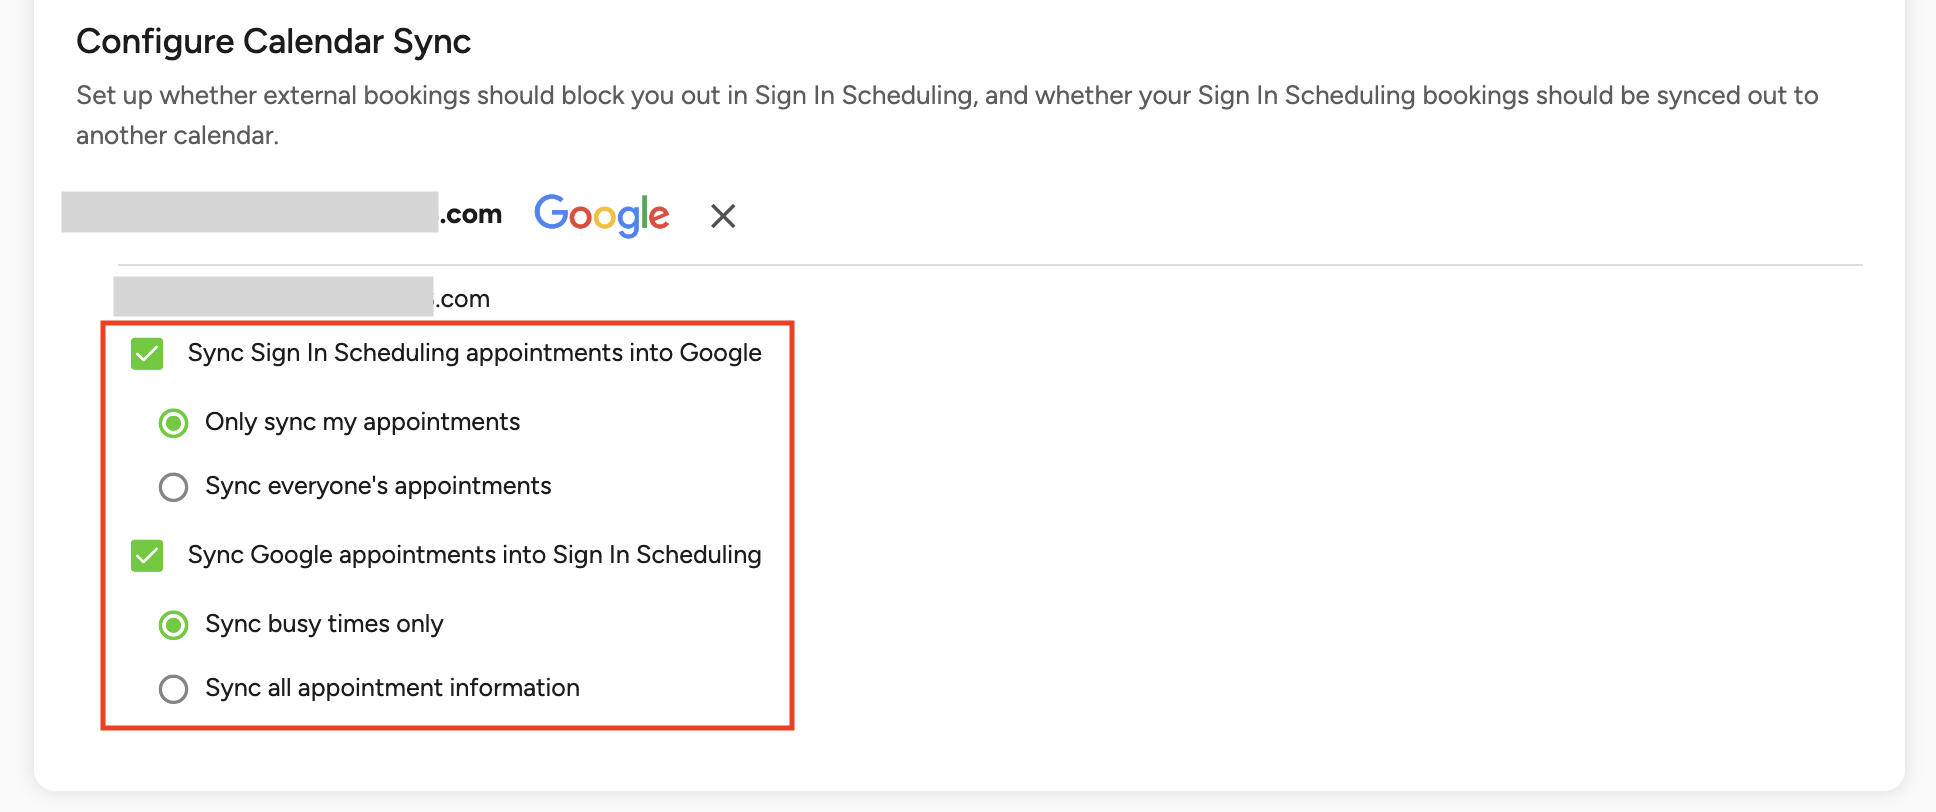 How to set up your calendar sync with Sign In Scheduling 10to8